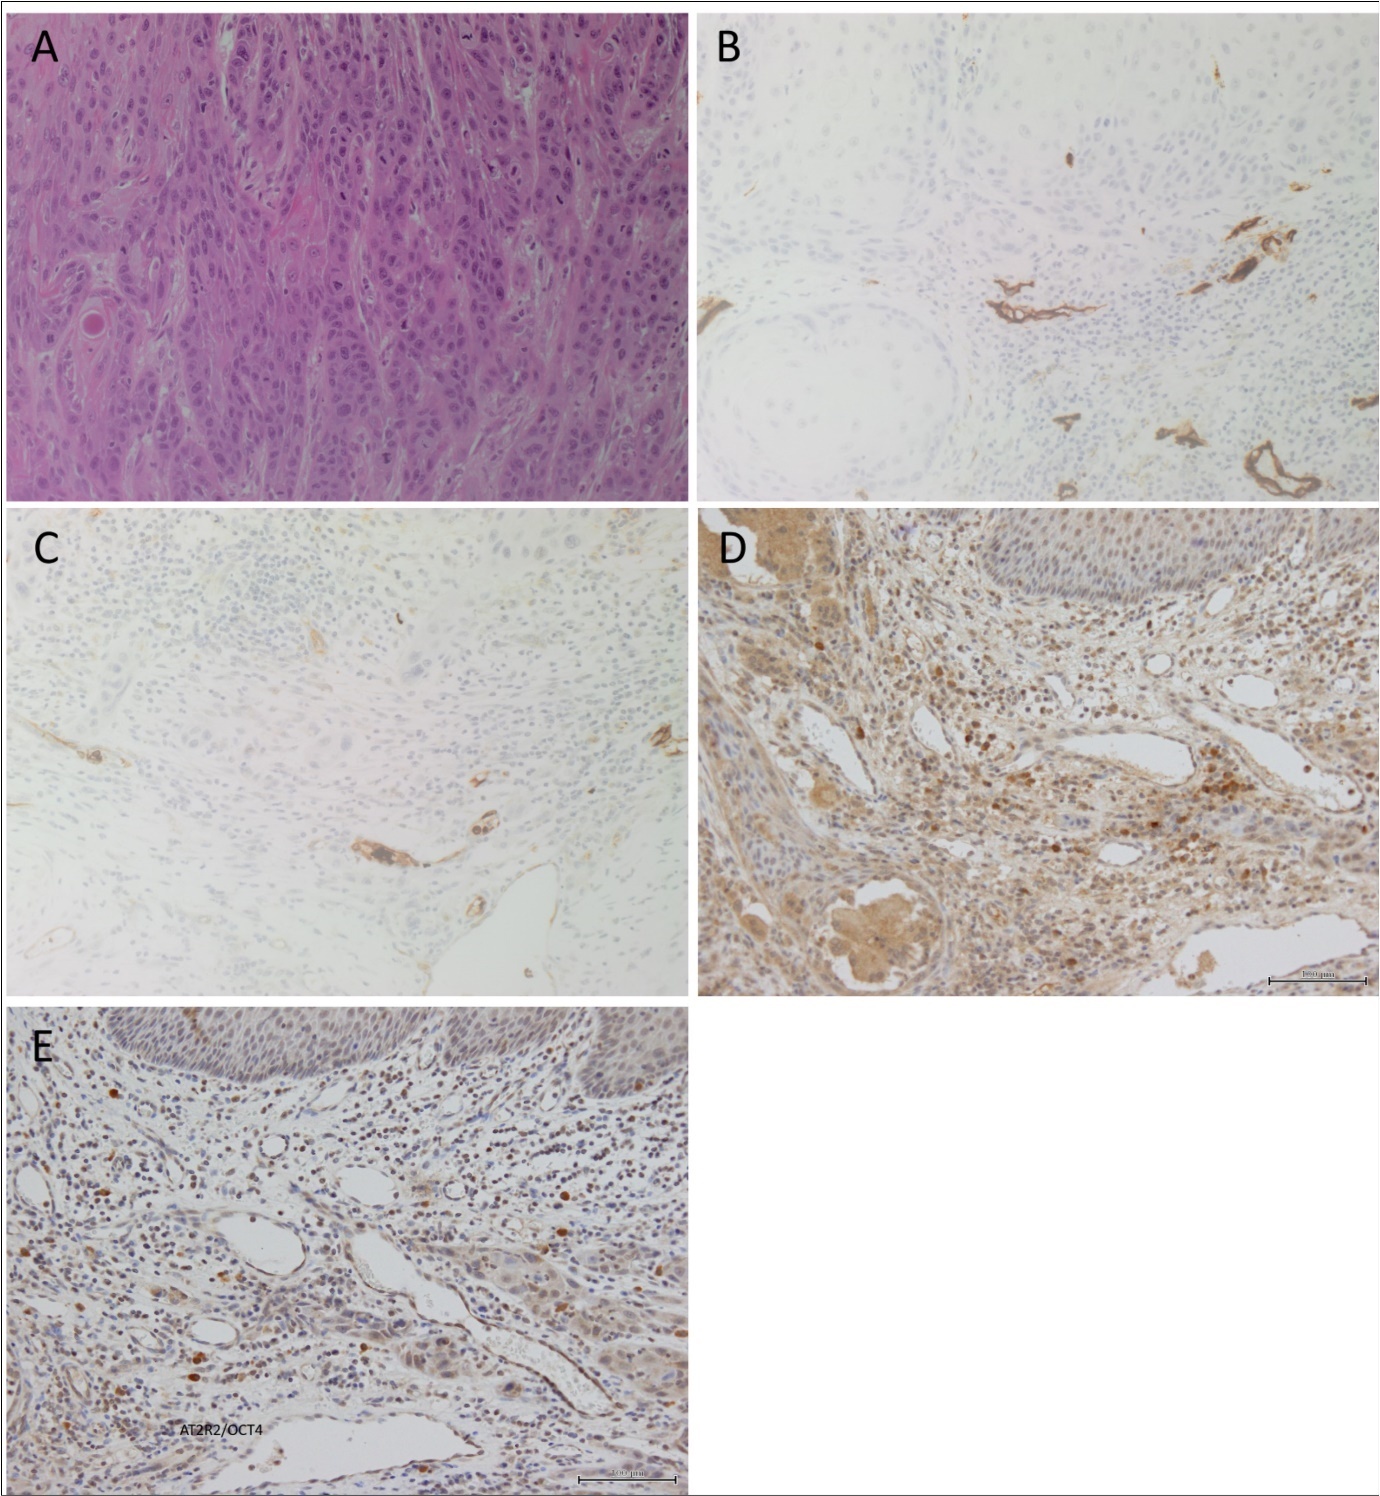  A representative H&E stain of an oral tongue squamous cell carcinoma (OTSCC) showing the presence of the tumor (A). Representative images of OTSCC stained positively for CD34 (B, brown), ACE (C, brown), ATIIR1 (D, brown) and ATIIR2 (E, brown). Nuclei were counterstained with hematoxylin (blue). Orignial magnification 200X.